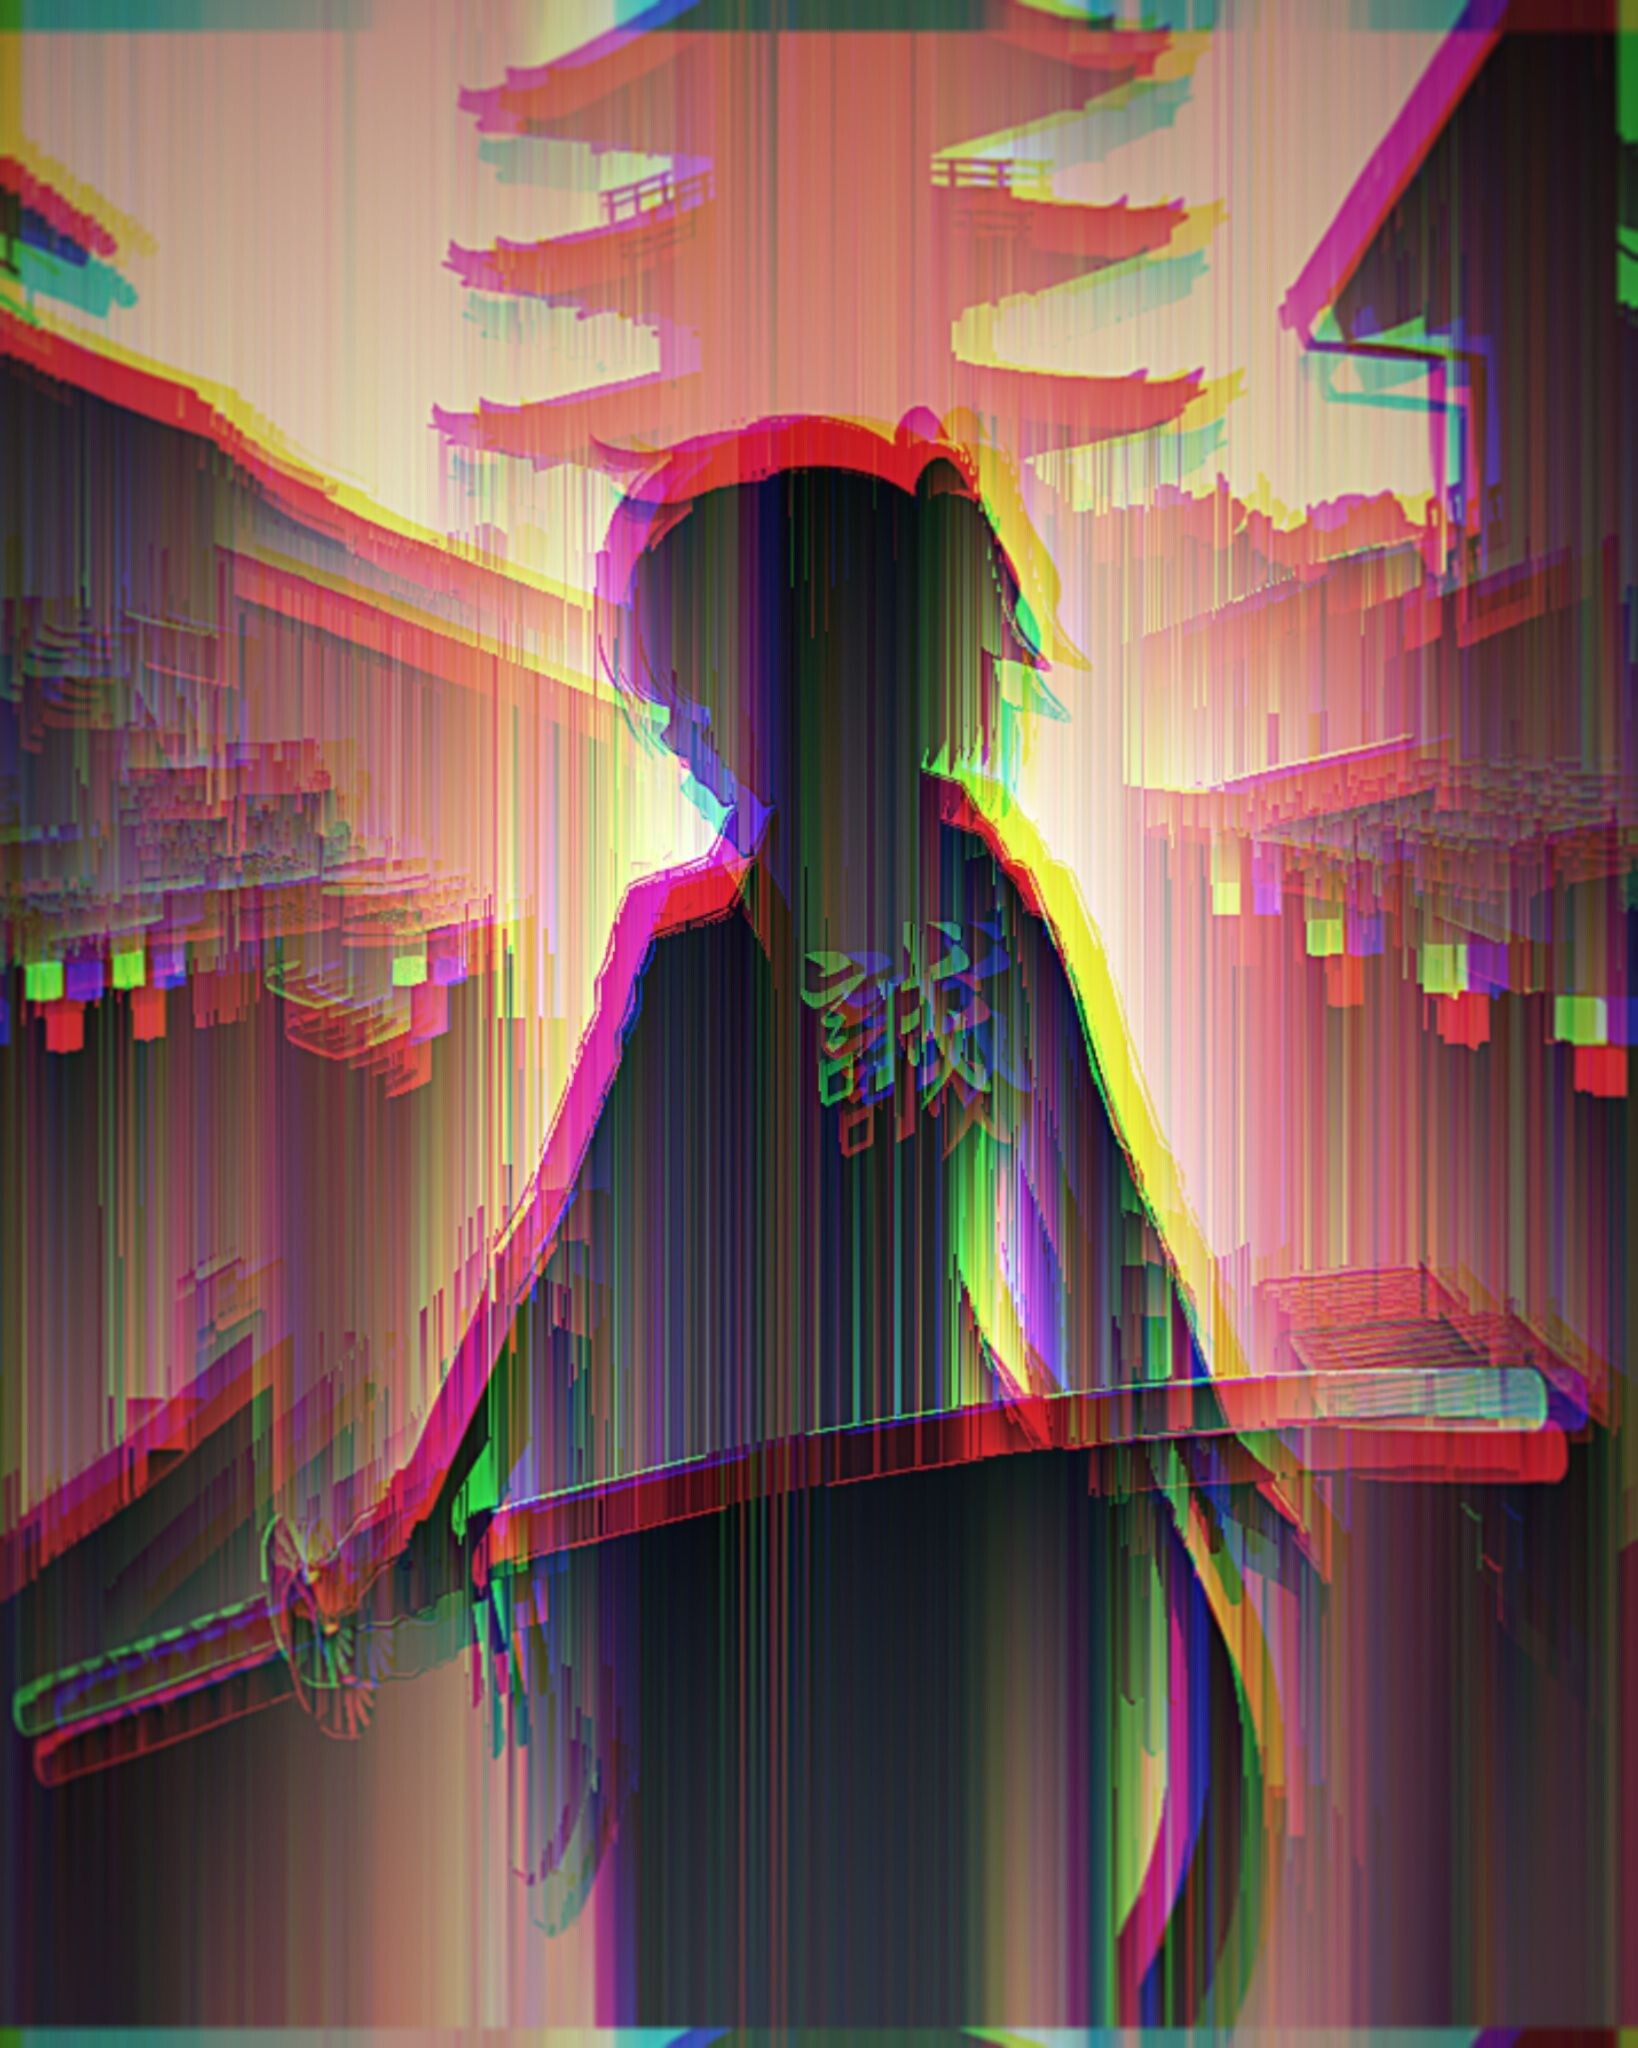 Glitch: Anime girl, Graphical malfunction, Red, Green, Blue, Parallel lines. 1640x2050 HD Wallpaper.